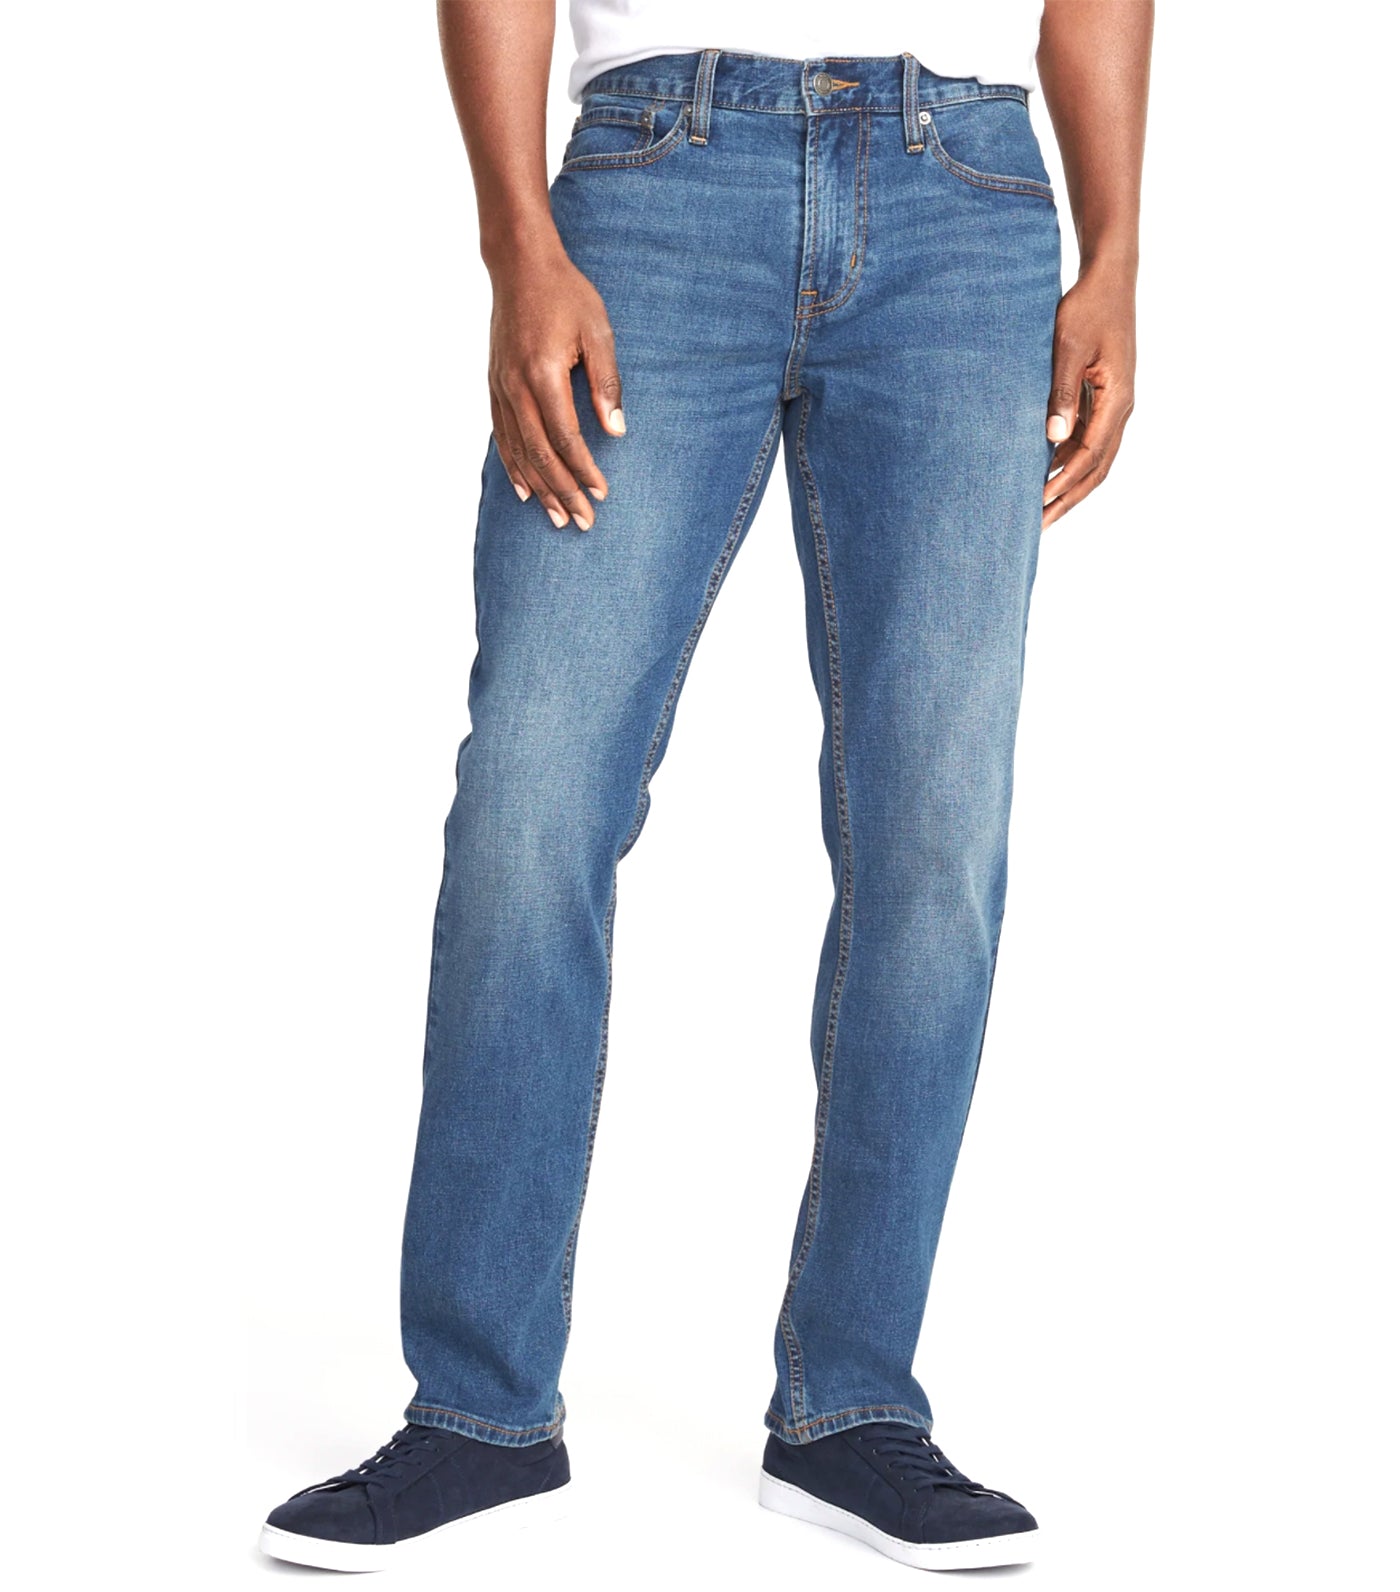 old navy straight jeans - light wash with tint